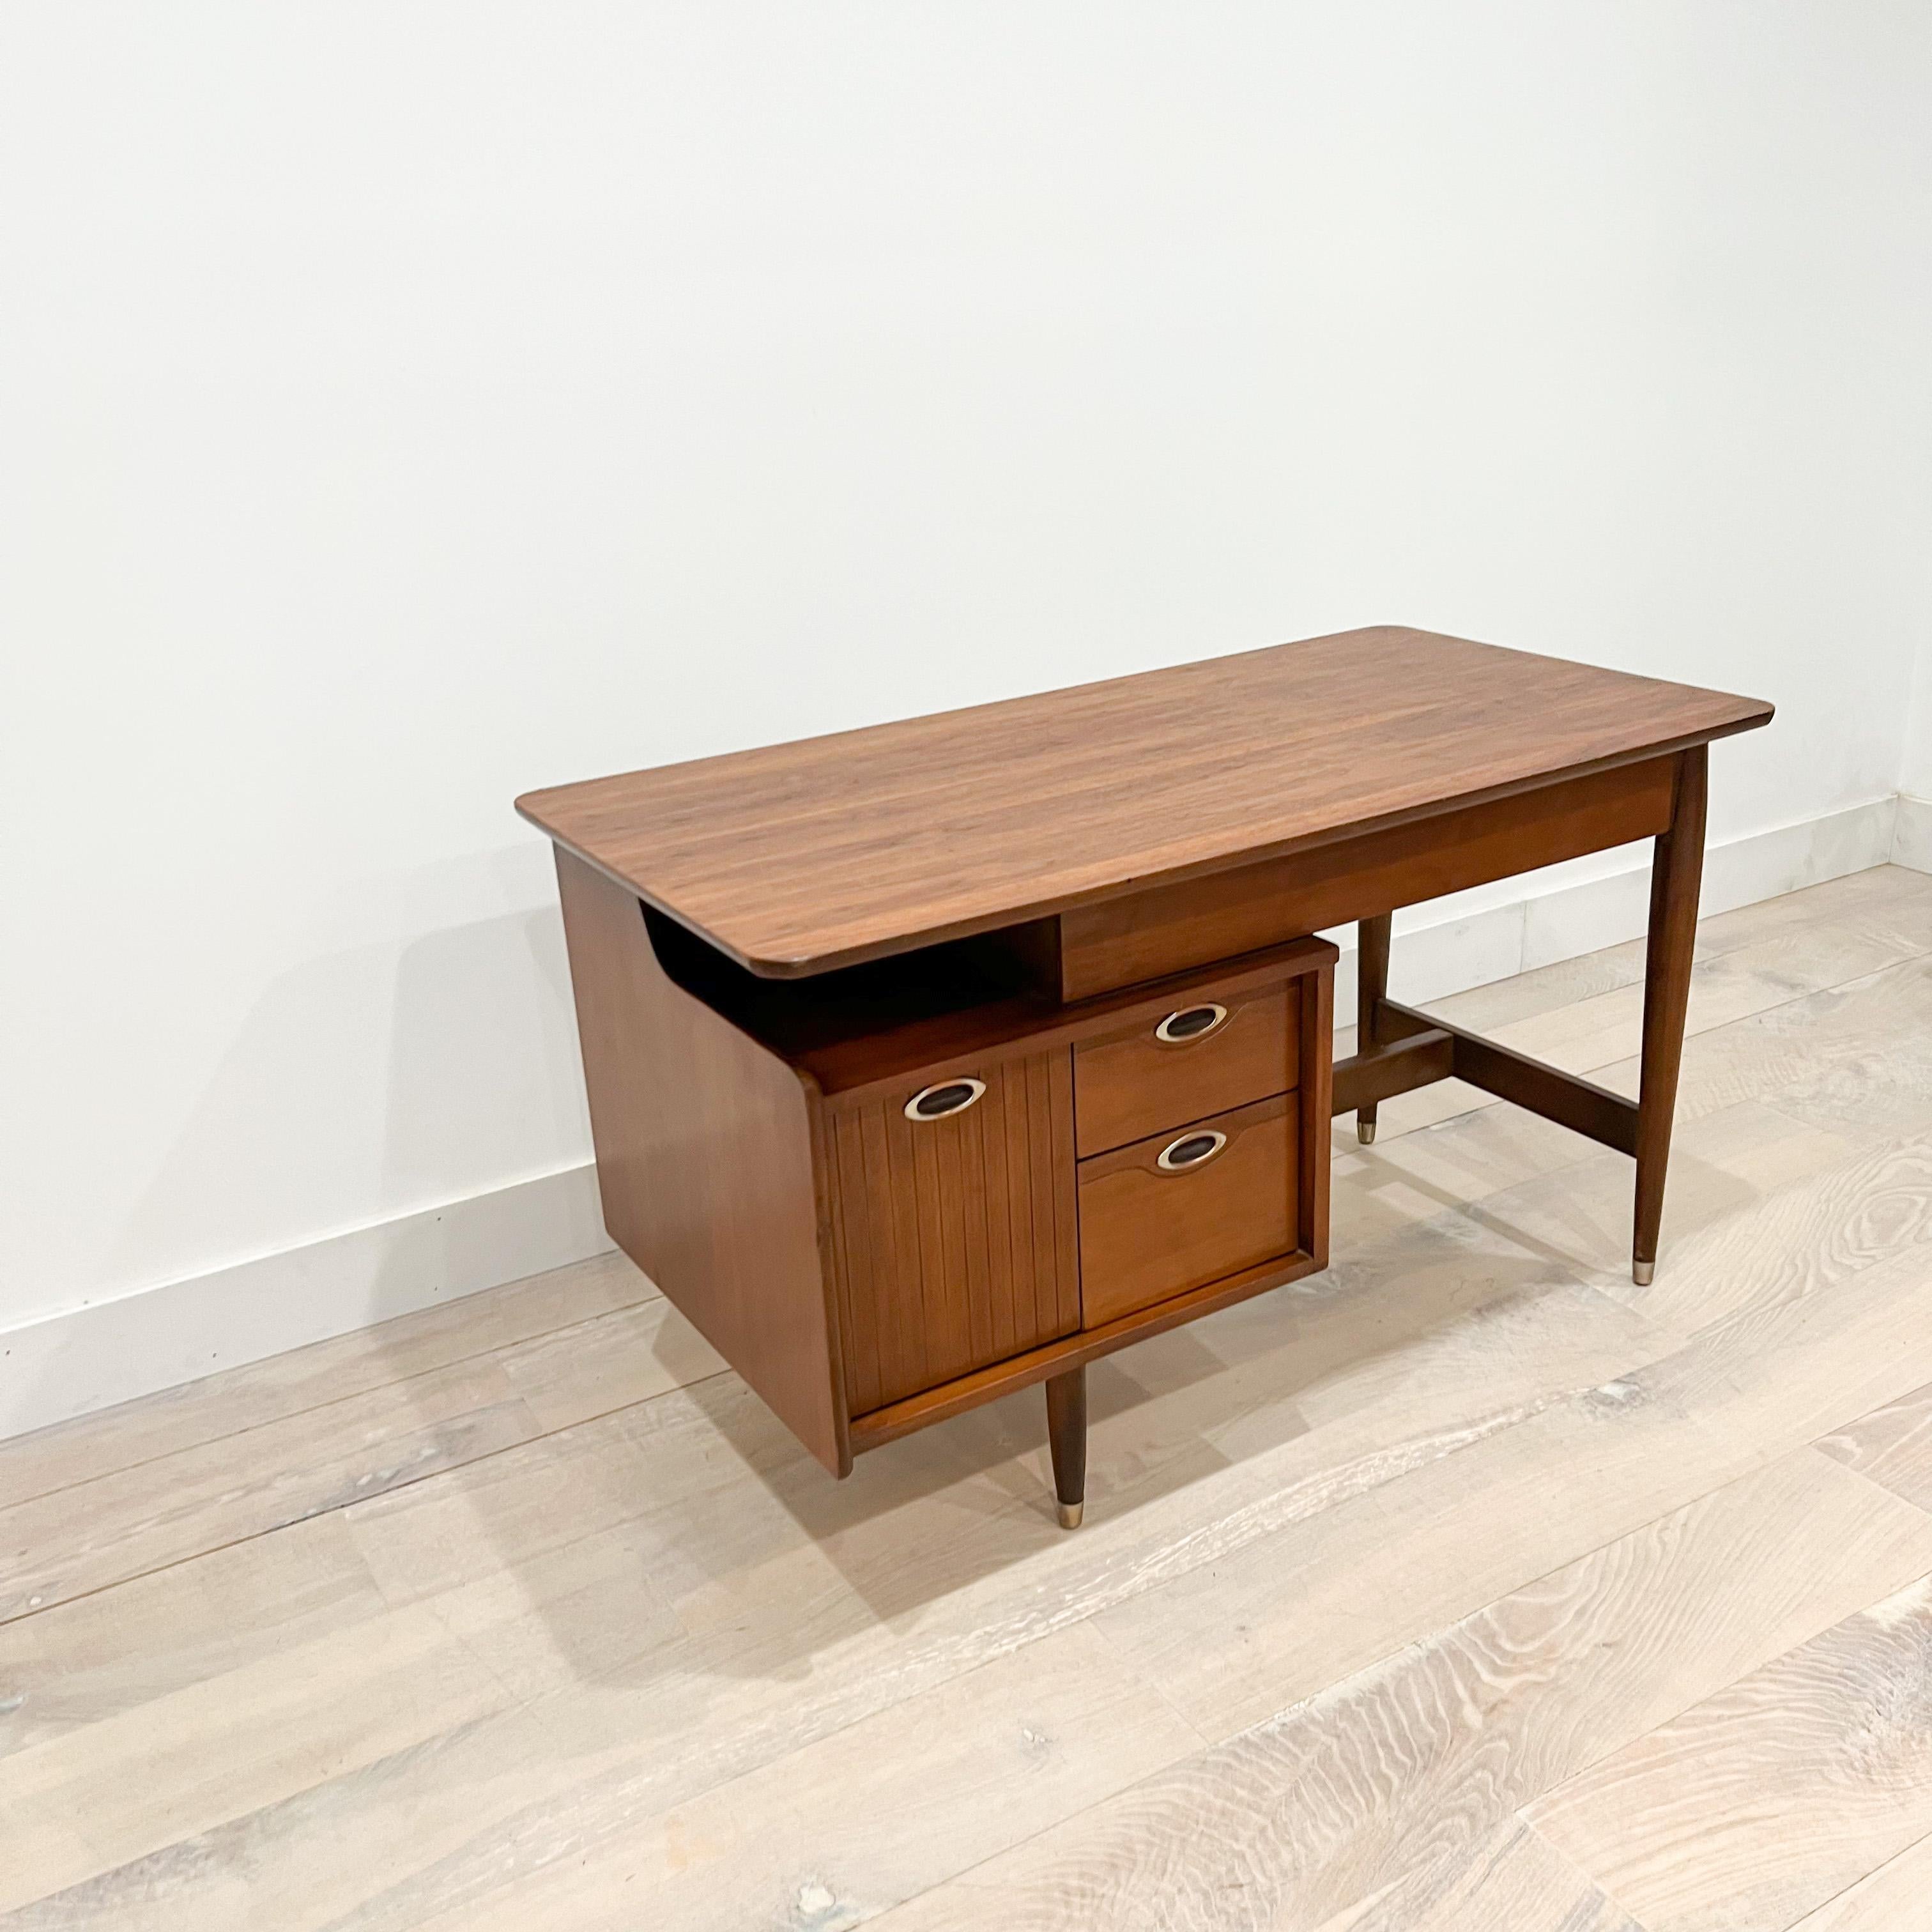 Mid-Century Modern walnut desk was manufactured by Hooker Furniture, as part of the 